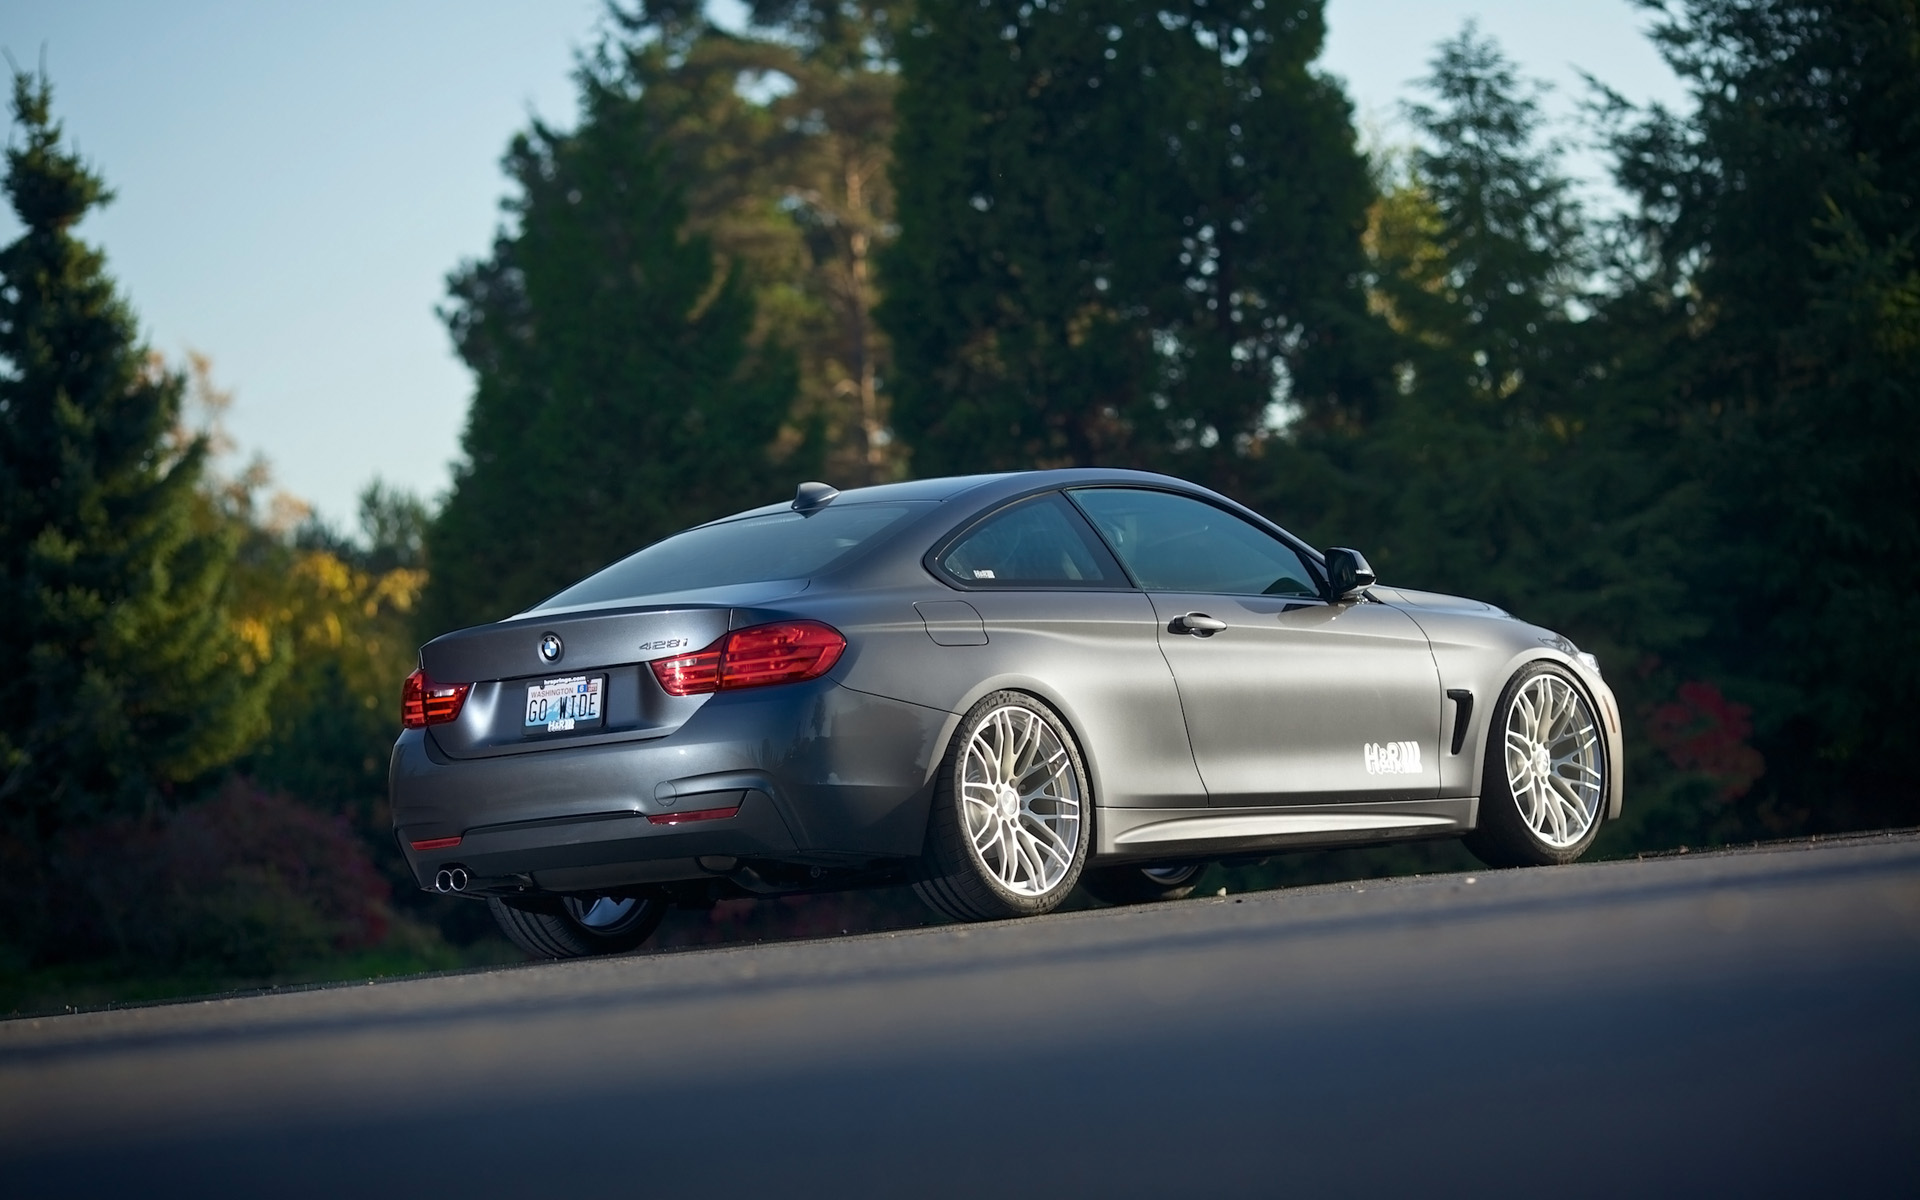 2014, Hr springs, Bmw, 428i, M sport, Coupe, Tuning Wallpaper